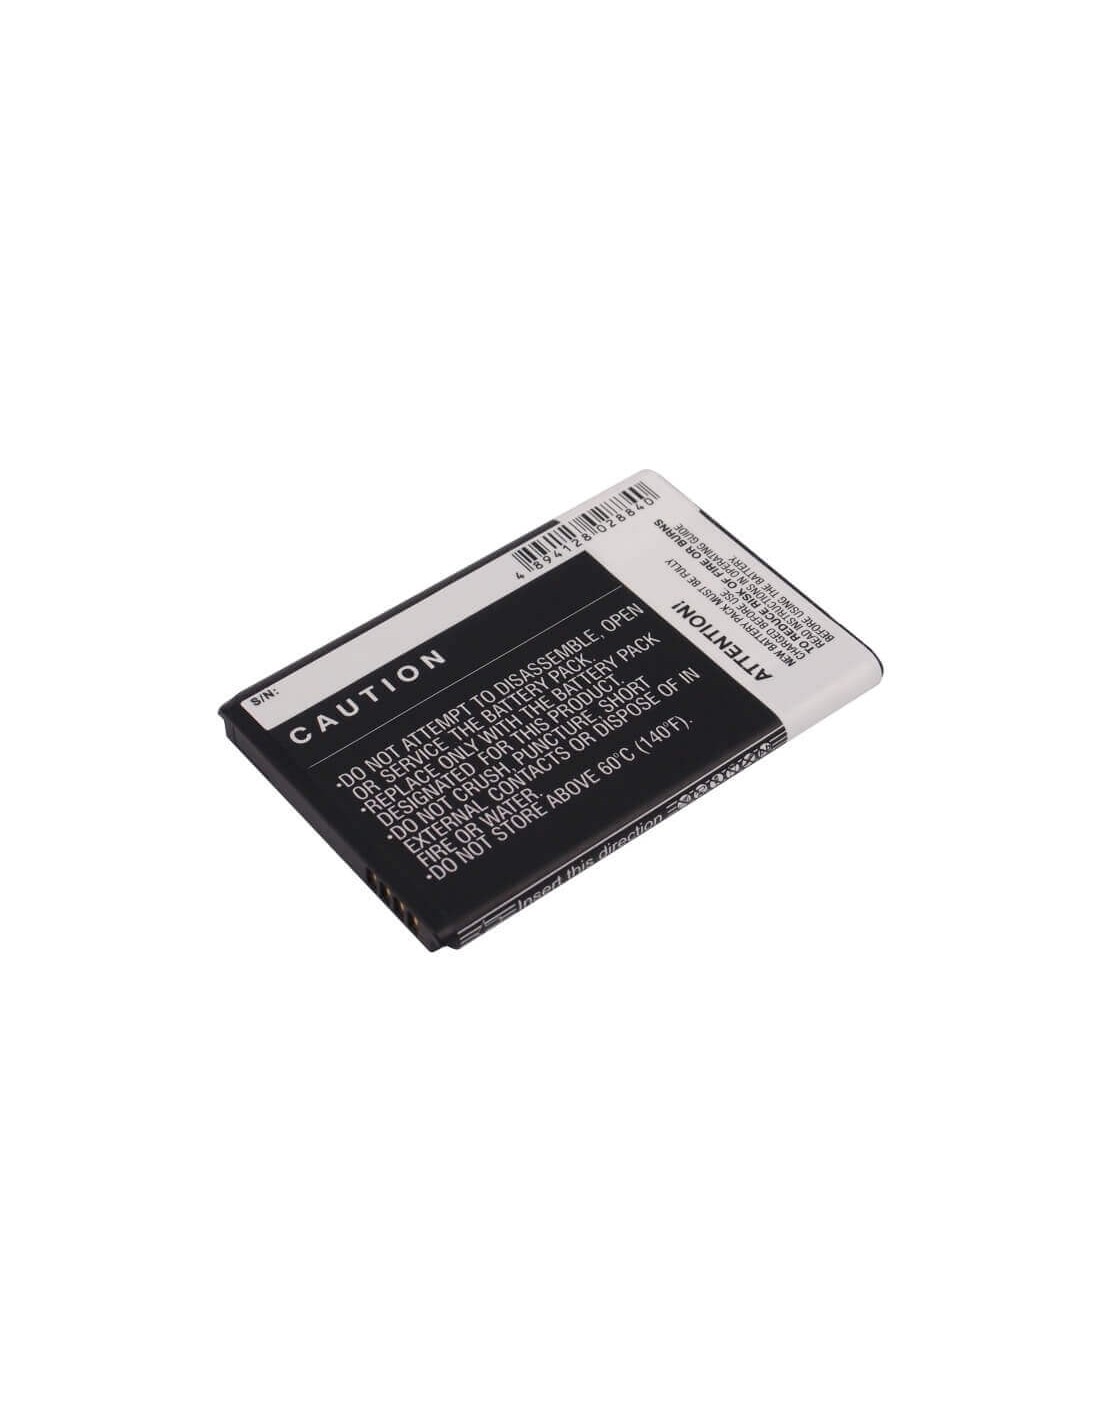 Battery for HTC Touch Pro 2, Touch Pro II, T7373 3.7V, 1600mAh - 5.92Wh